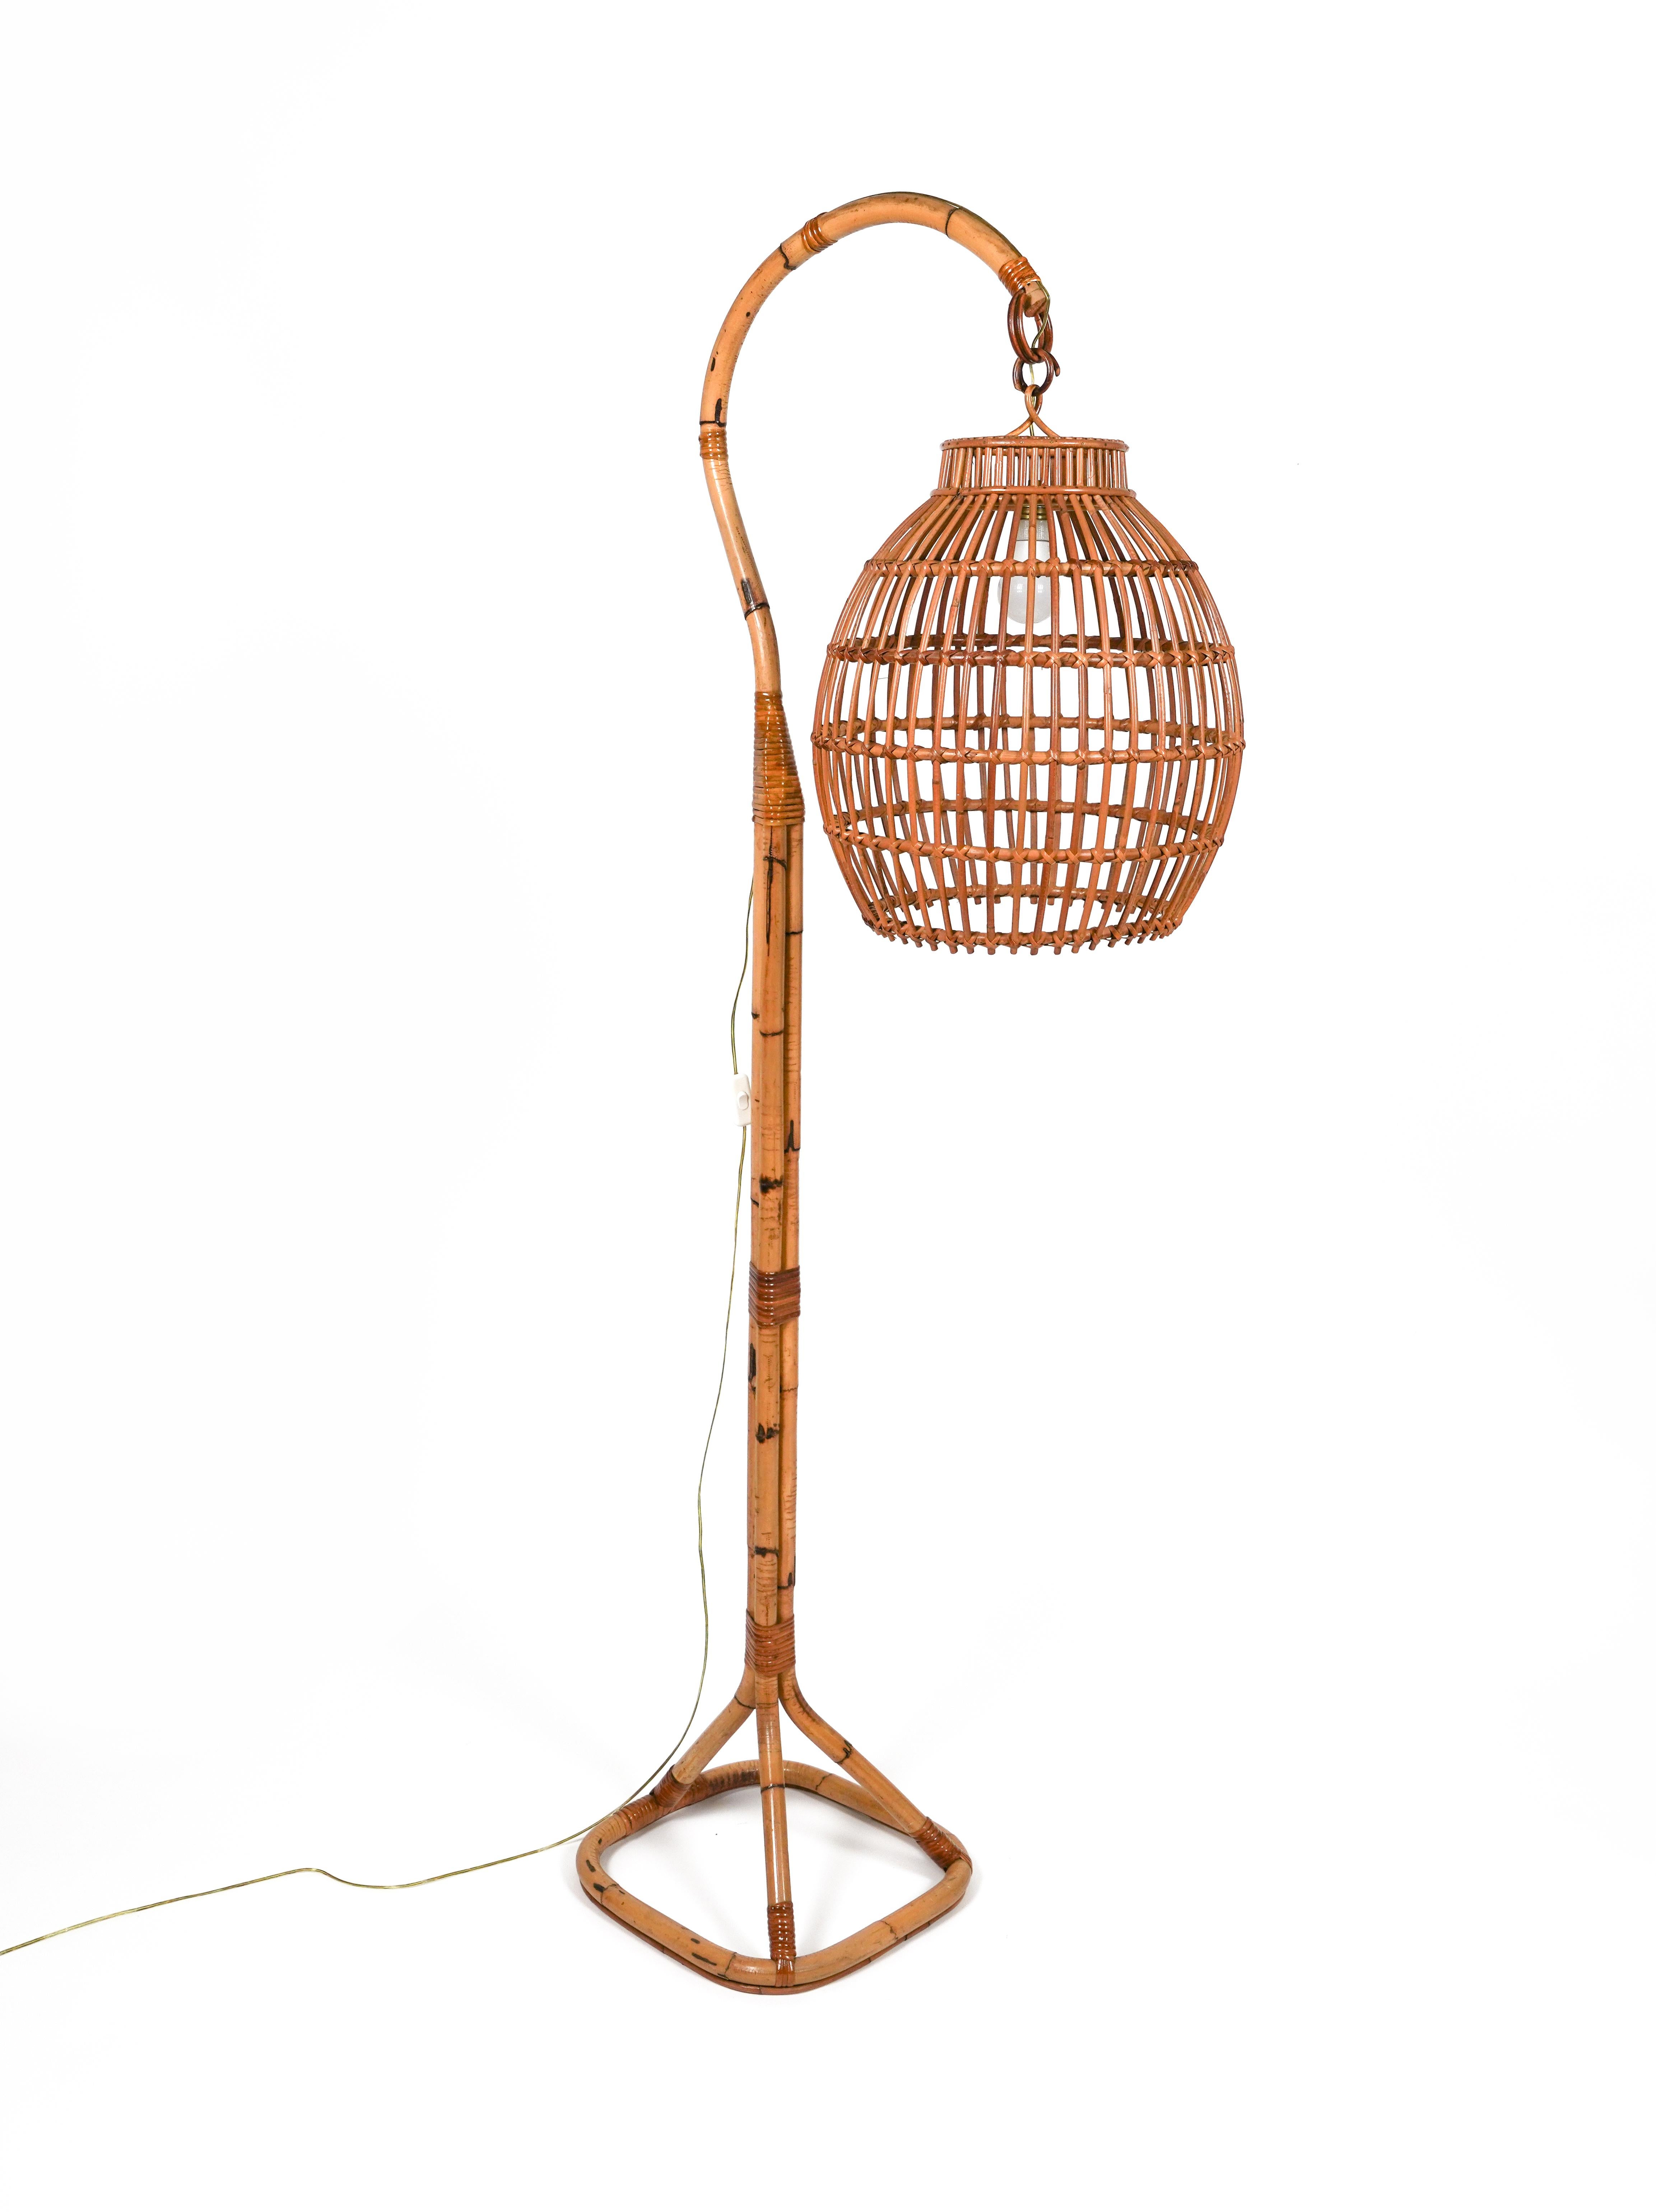 Midcentury Rattan and Bamboo Floor Lamp Louis Sognot Style, Italy 1960s For Sale 4